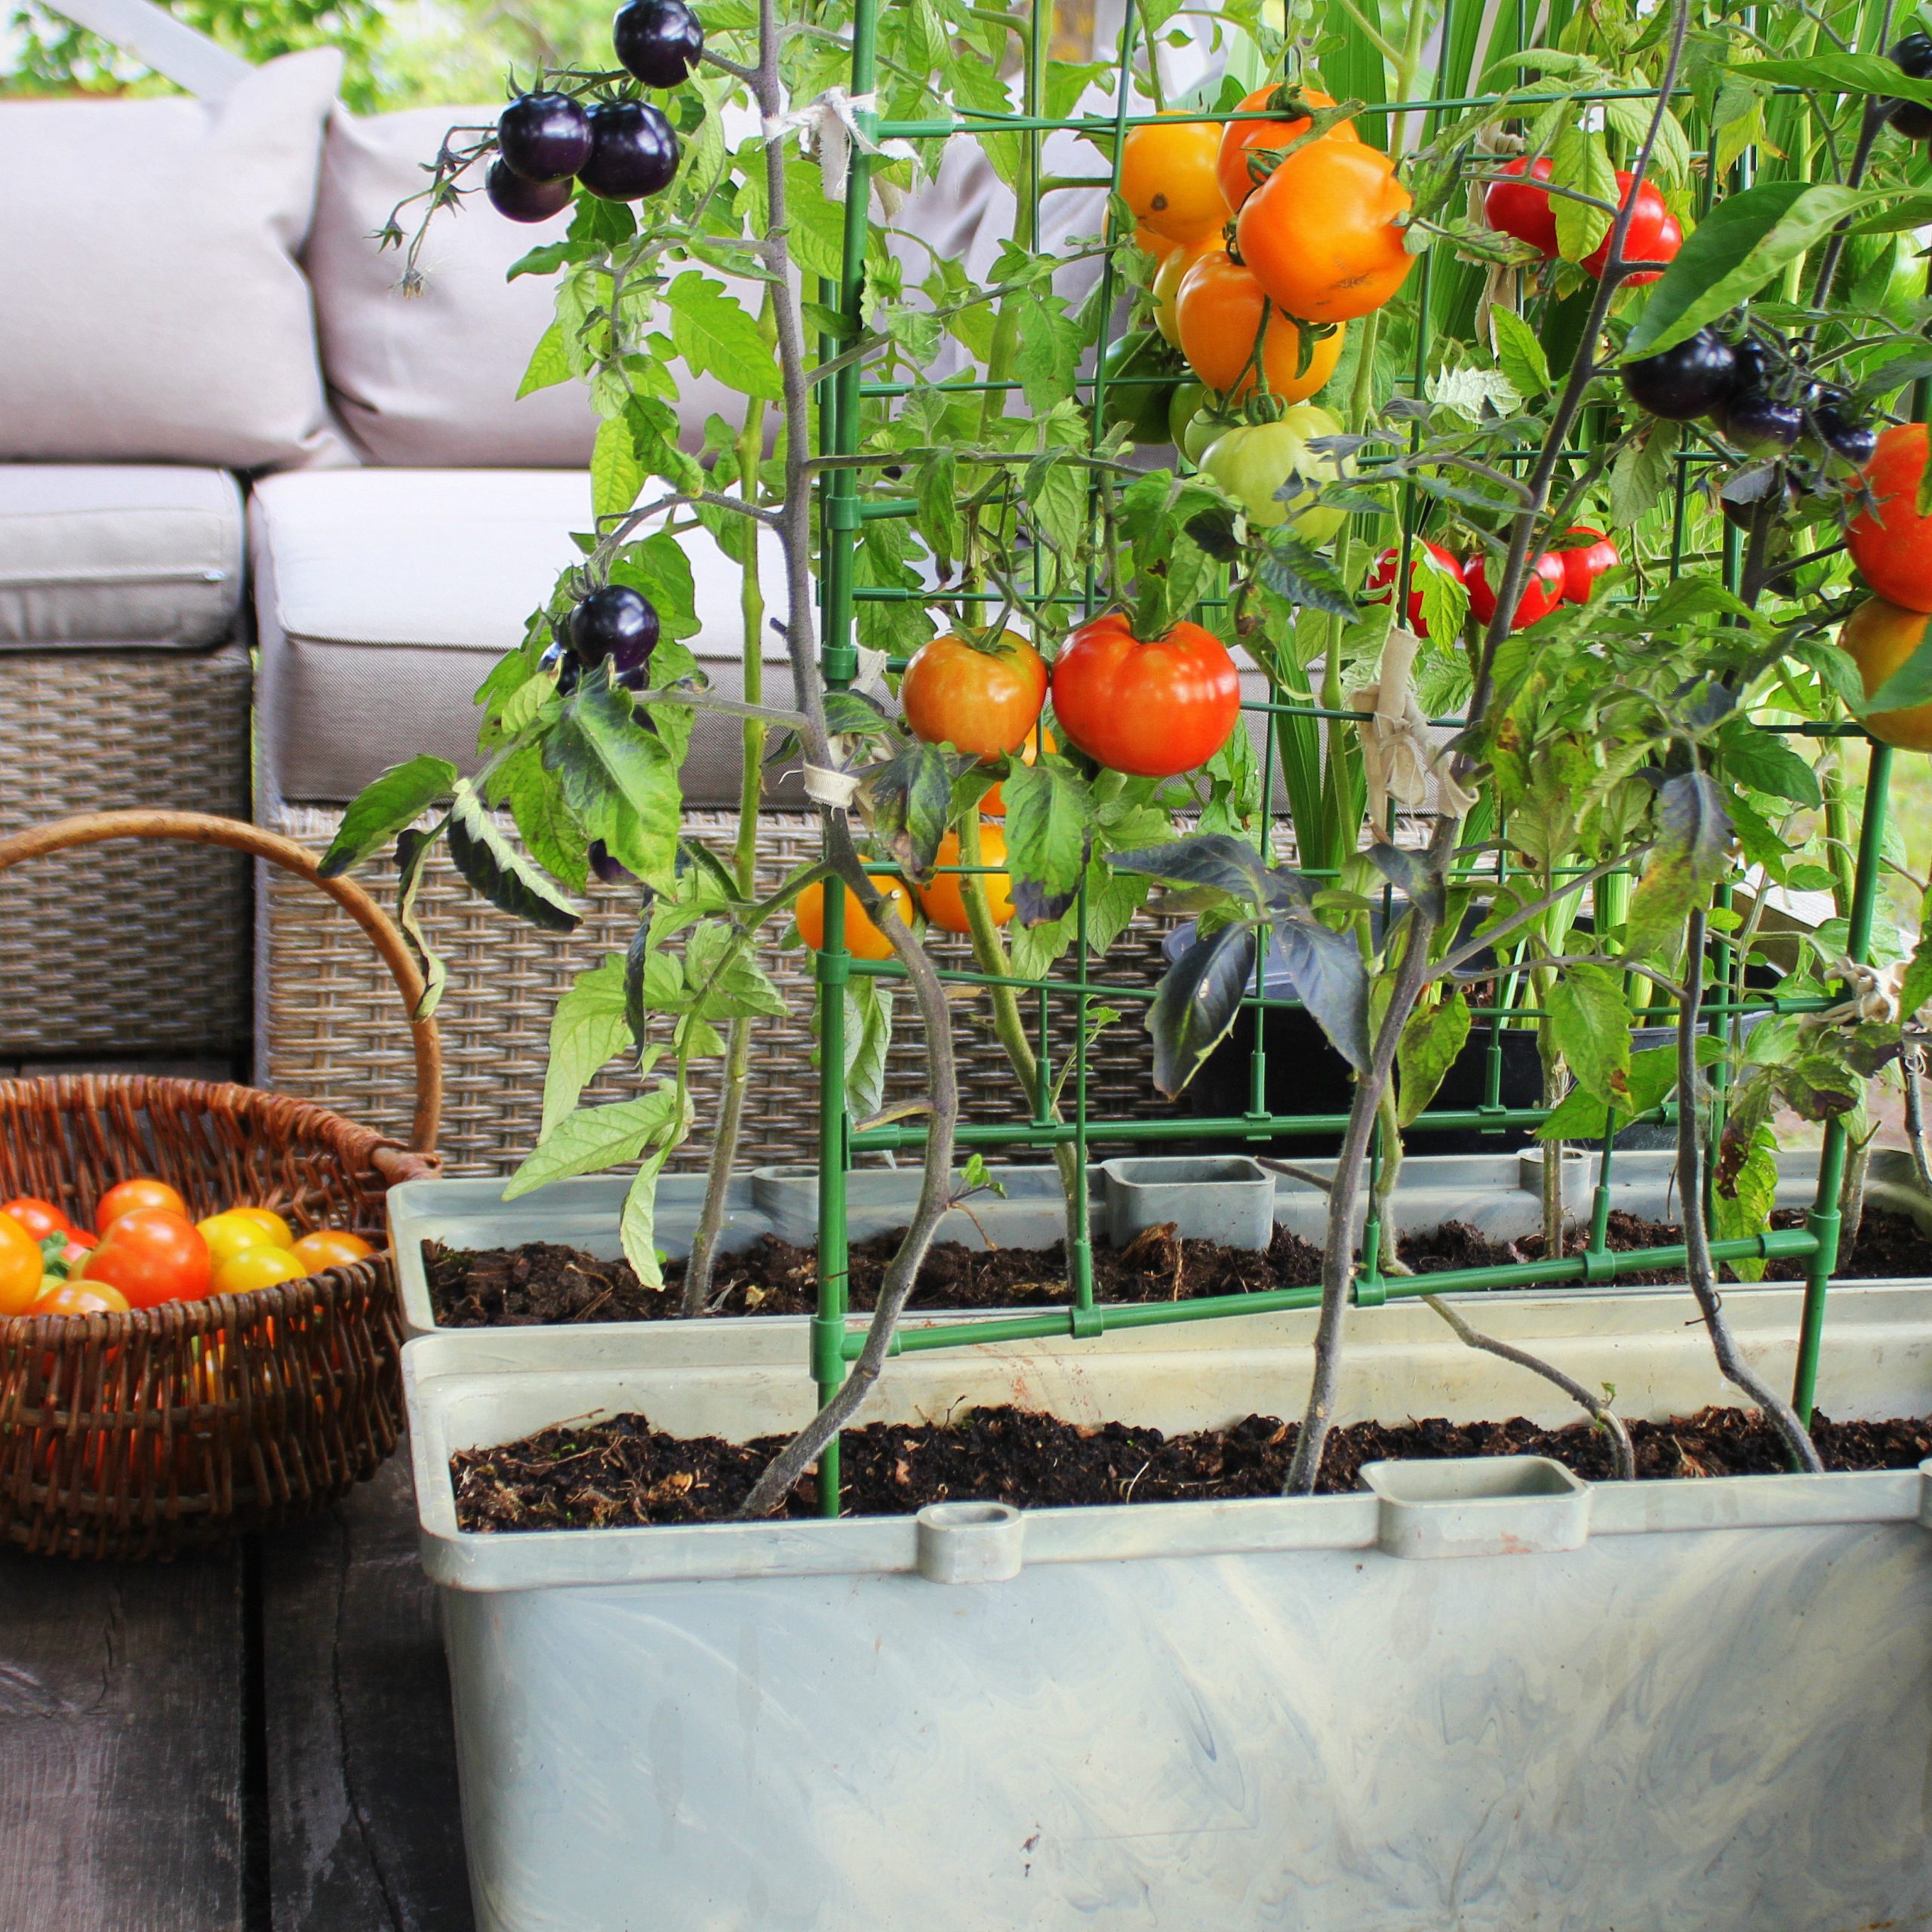 Container vegetables gardening. Vegetable garden on a terrace. Red, orange, yellow, black tomatoes growing in container .